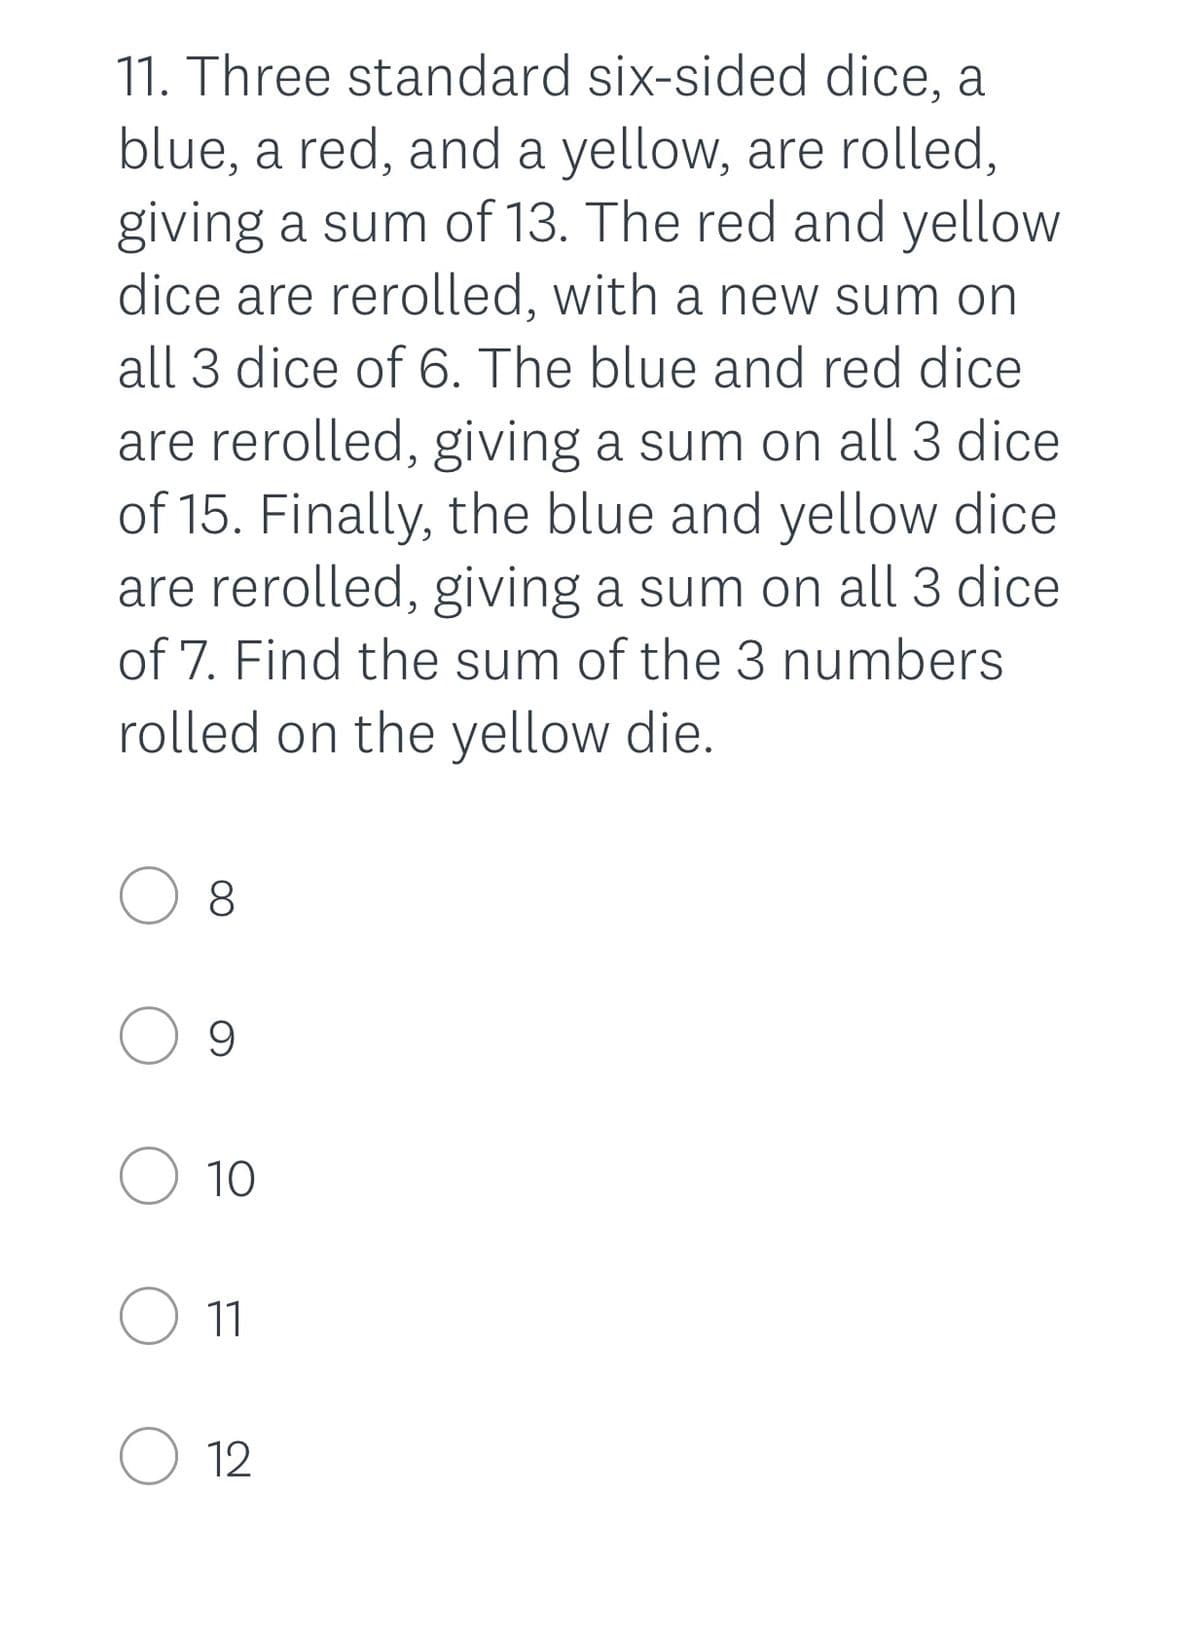 11. Three standard six-sided dice, a
blue, a red, and a yellow, are rolled,
giving a sum of 13. The red and yellow
dice are rerolled, with a new sum on
all 3 dice of 6. The blue and red dice
are rerolled, giving a sum on all 3 dice
of 15. Finally, the blue and yellow dice
are rerolled, giving a sum on all 3 dice
of 7. Find the sum of the 3 numbers
rolled on the yellow die.
O 8
O 9
O 10
11
O 12
